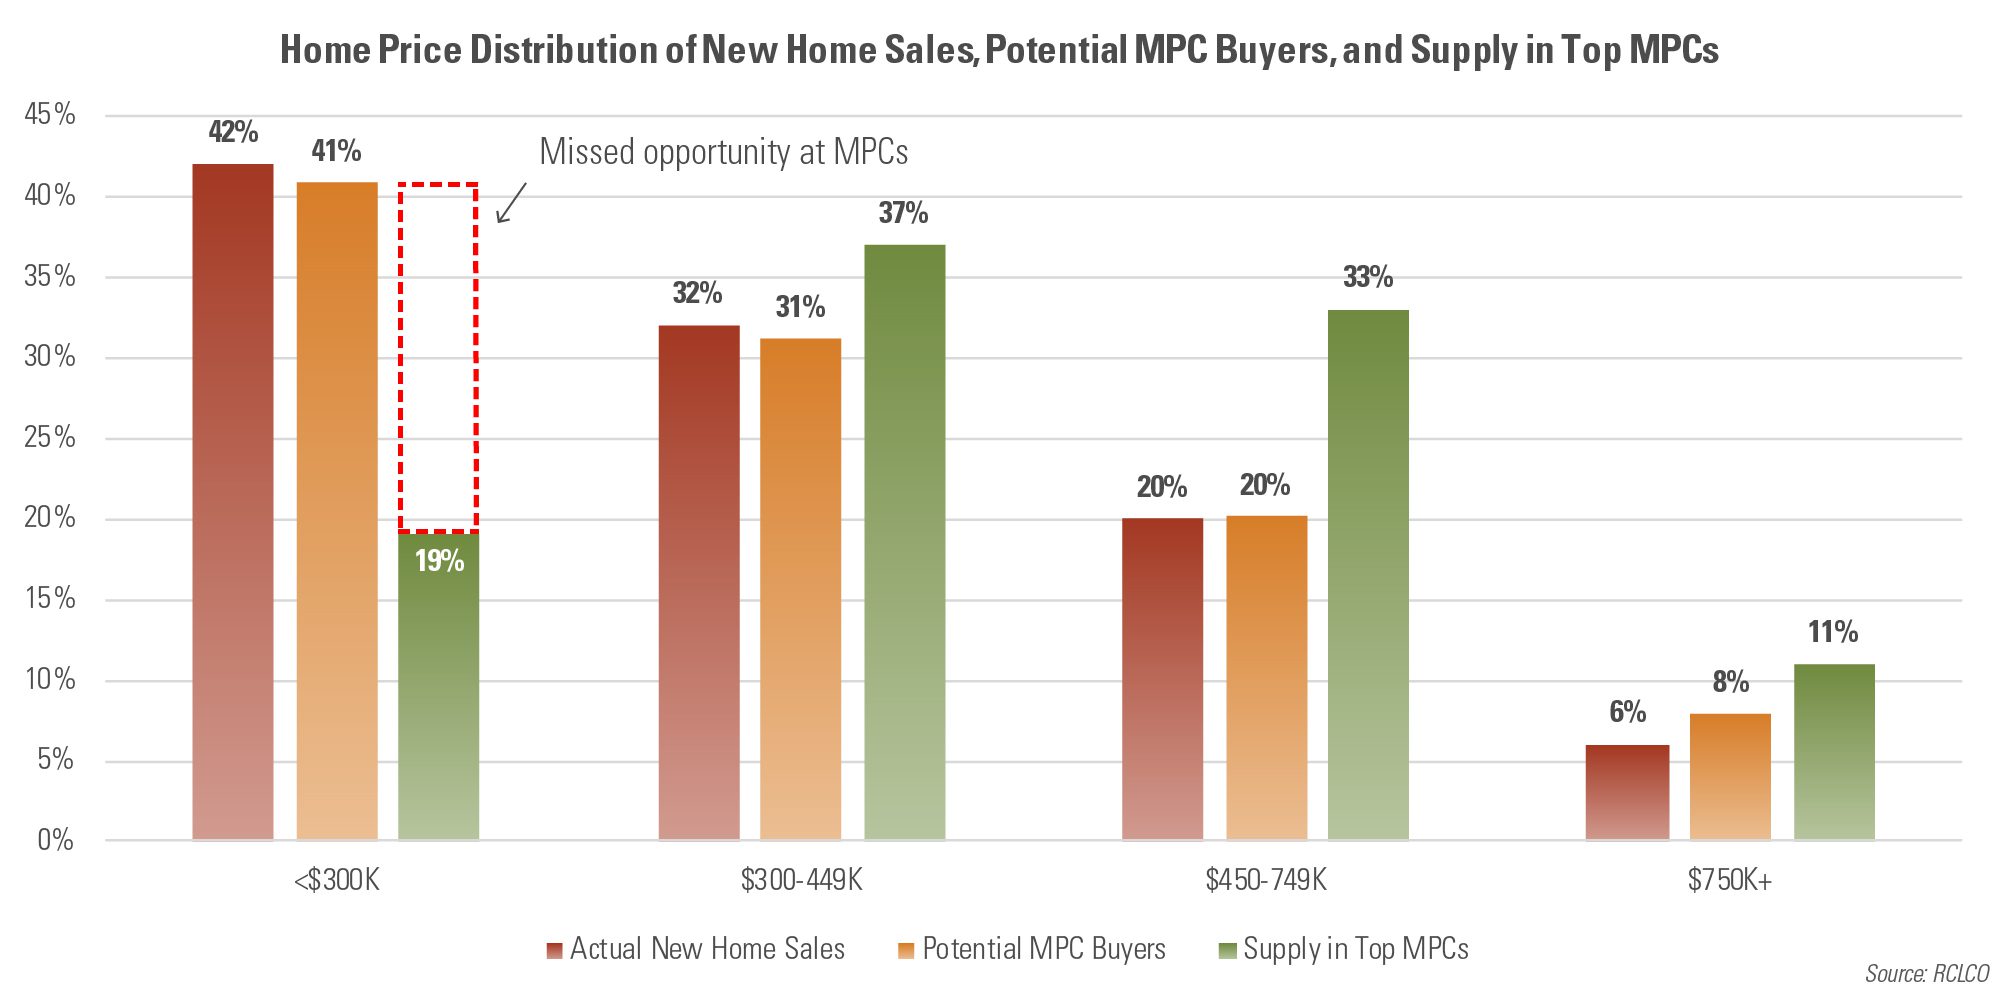 Home Price Distribution of New Home Sales, Potential MPC Buyers, and Supply in Top MPCs